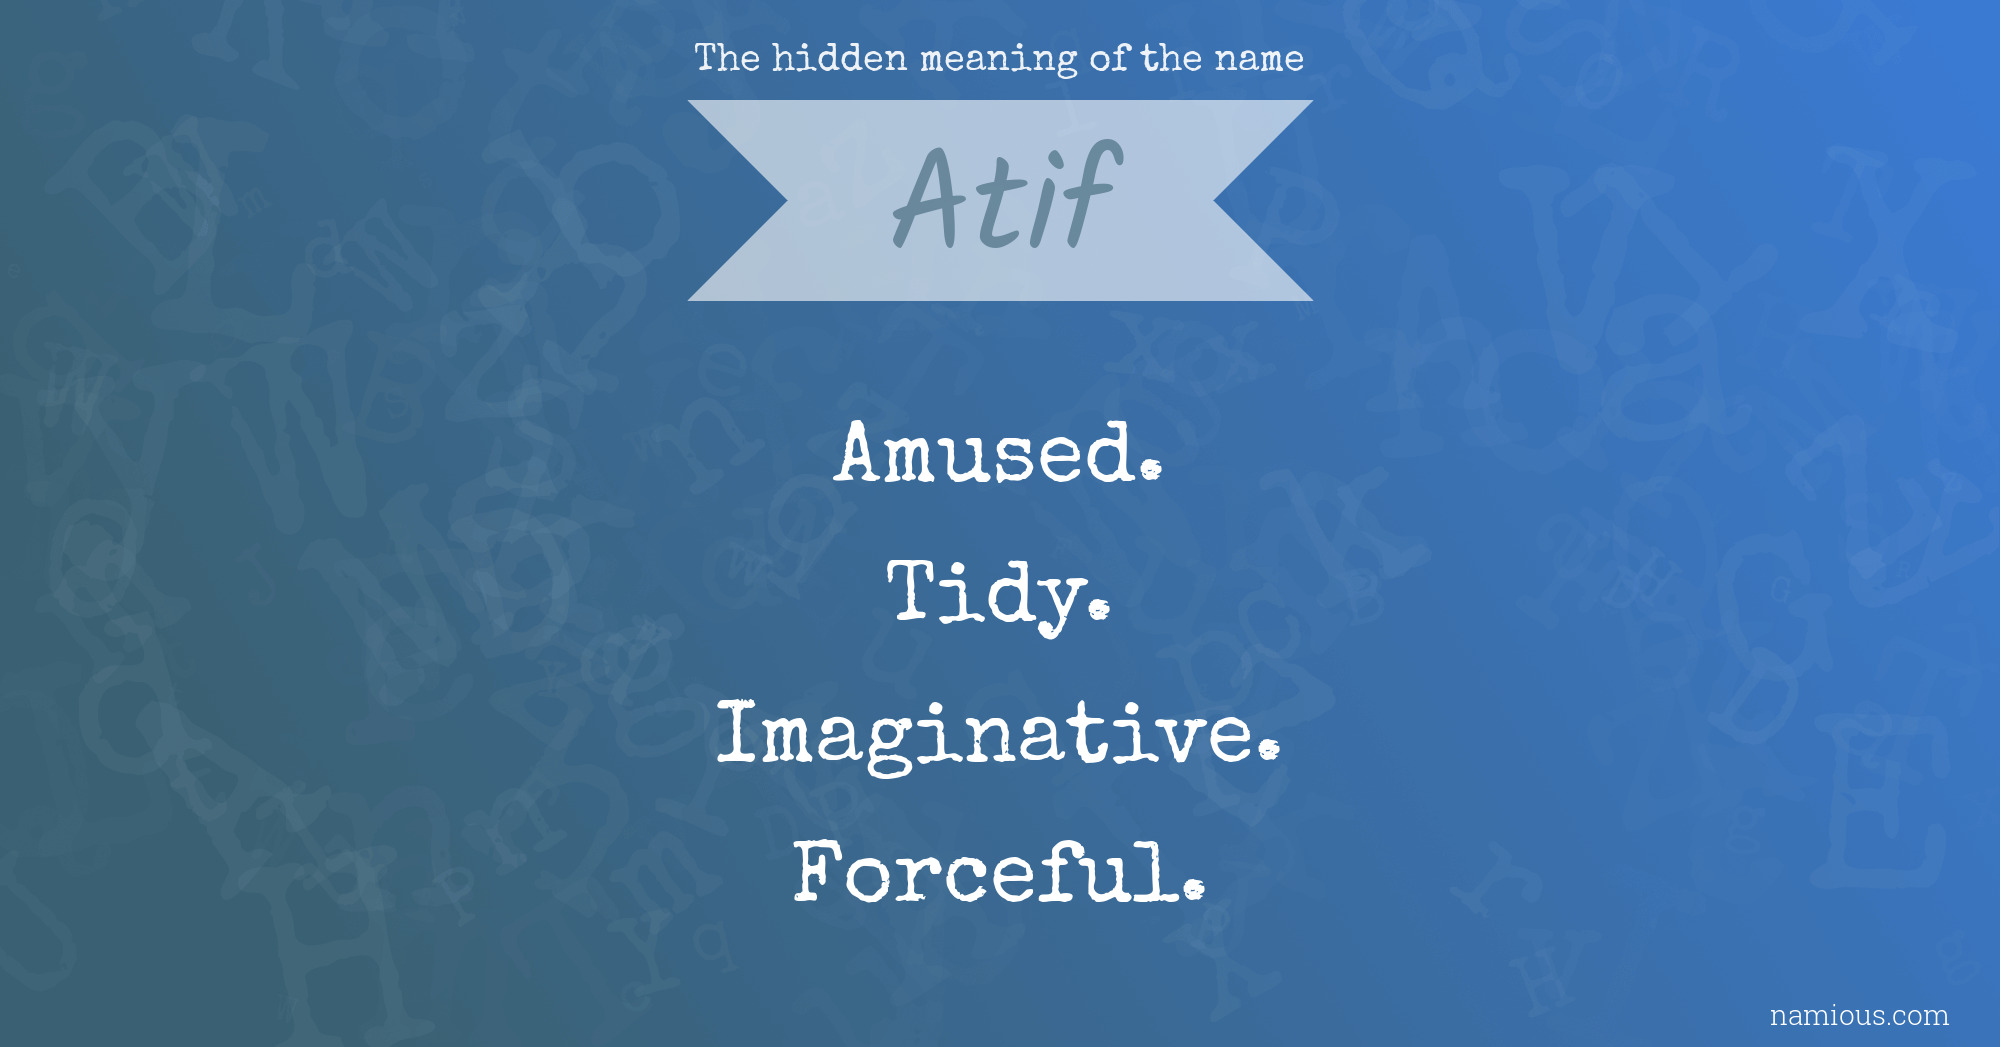 The hidden meaning of the name Atif